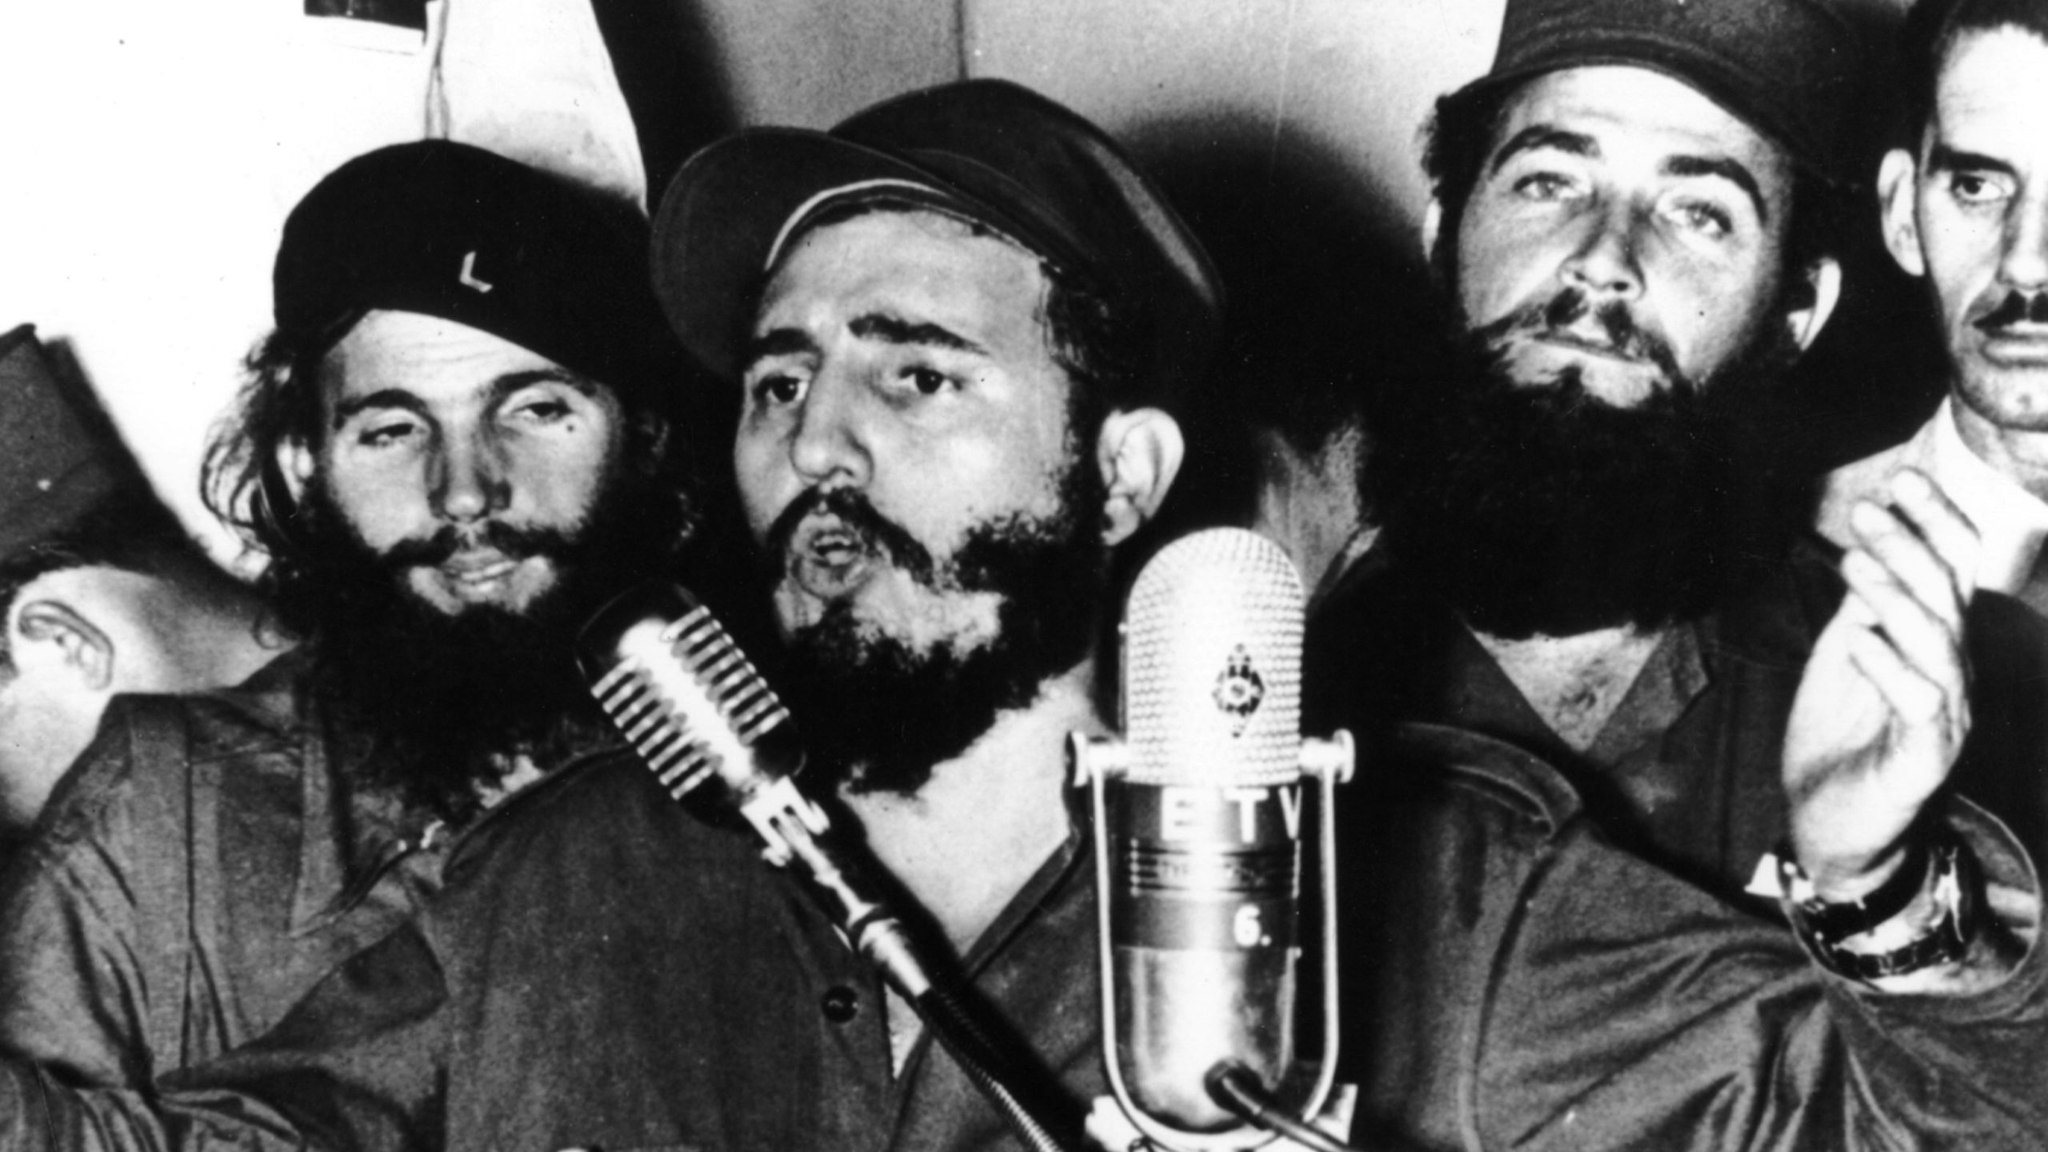 Cuban revolutionary Fidel Castro during an address in Cuba after Batista was forced to flee.